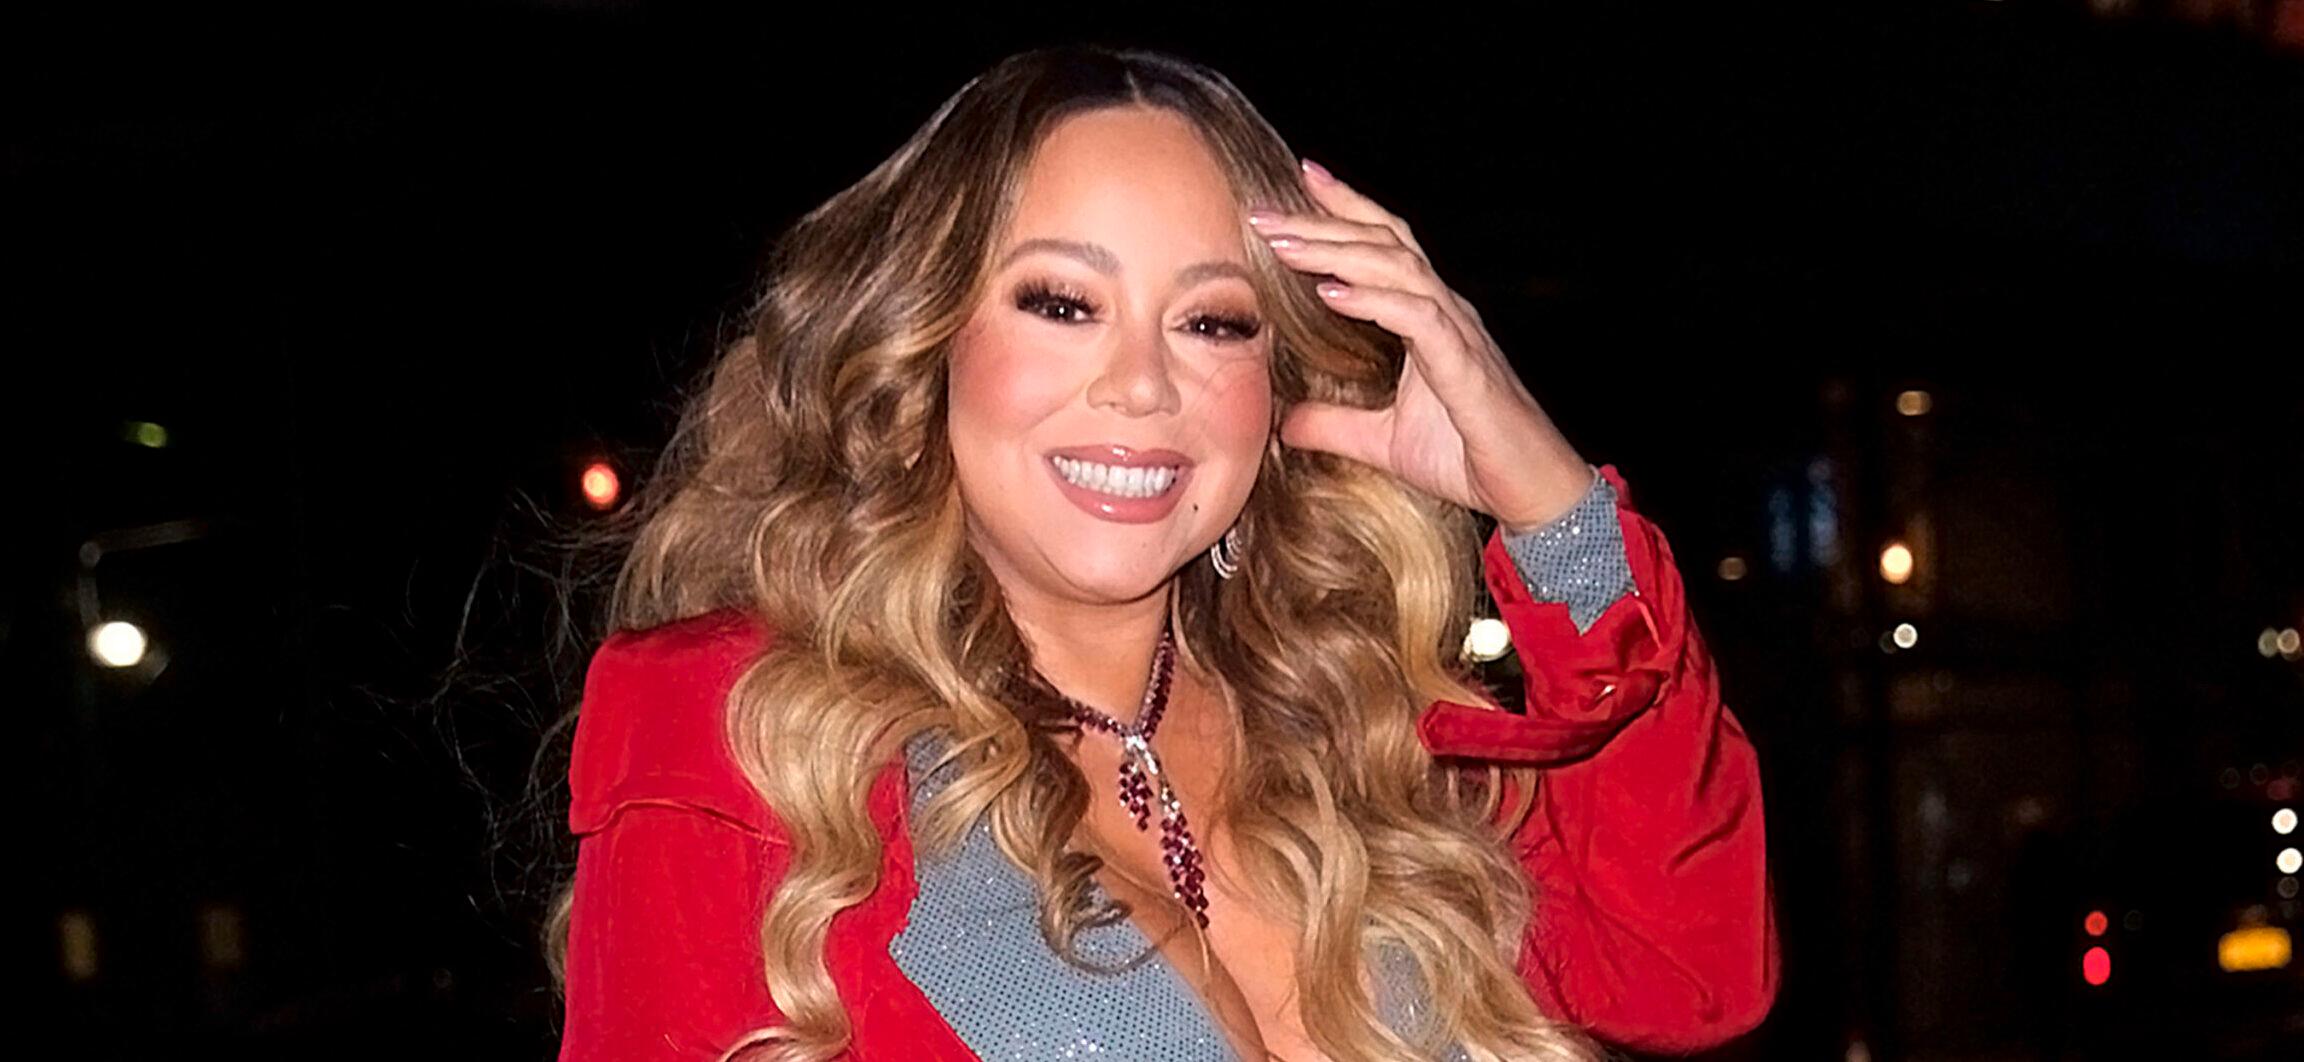 Mariah Carey arrives at Empire State Building in New York.